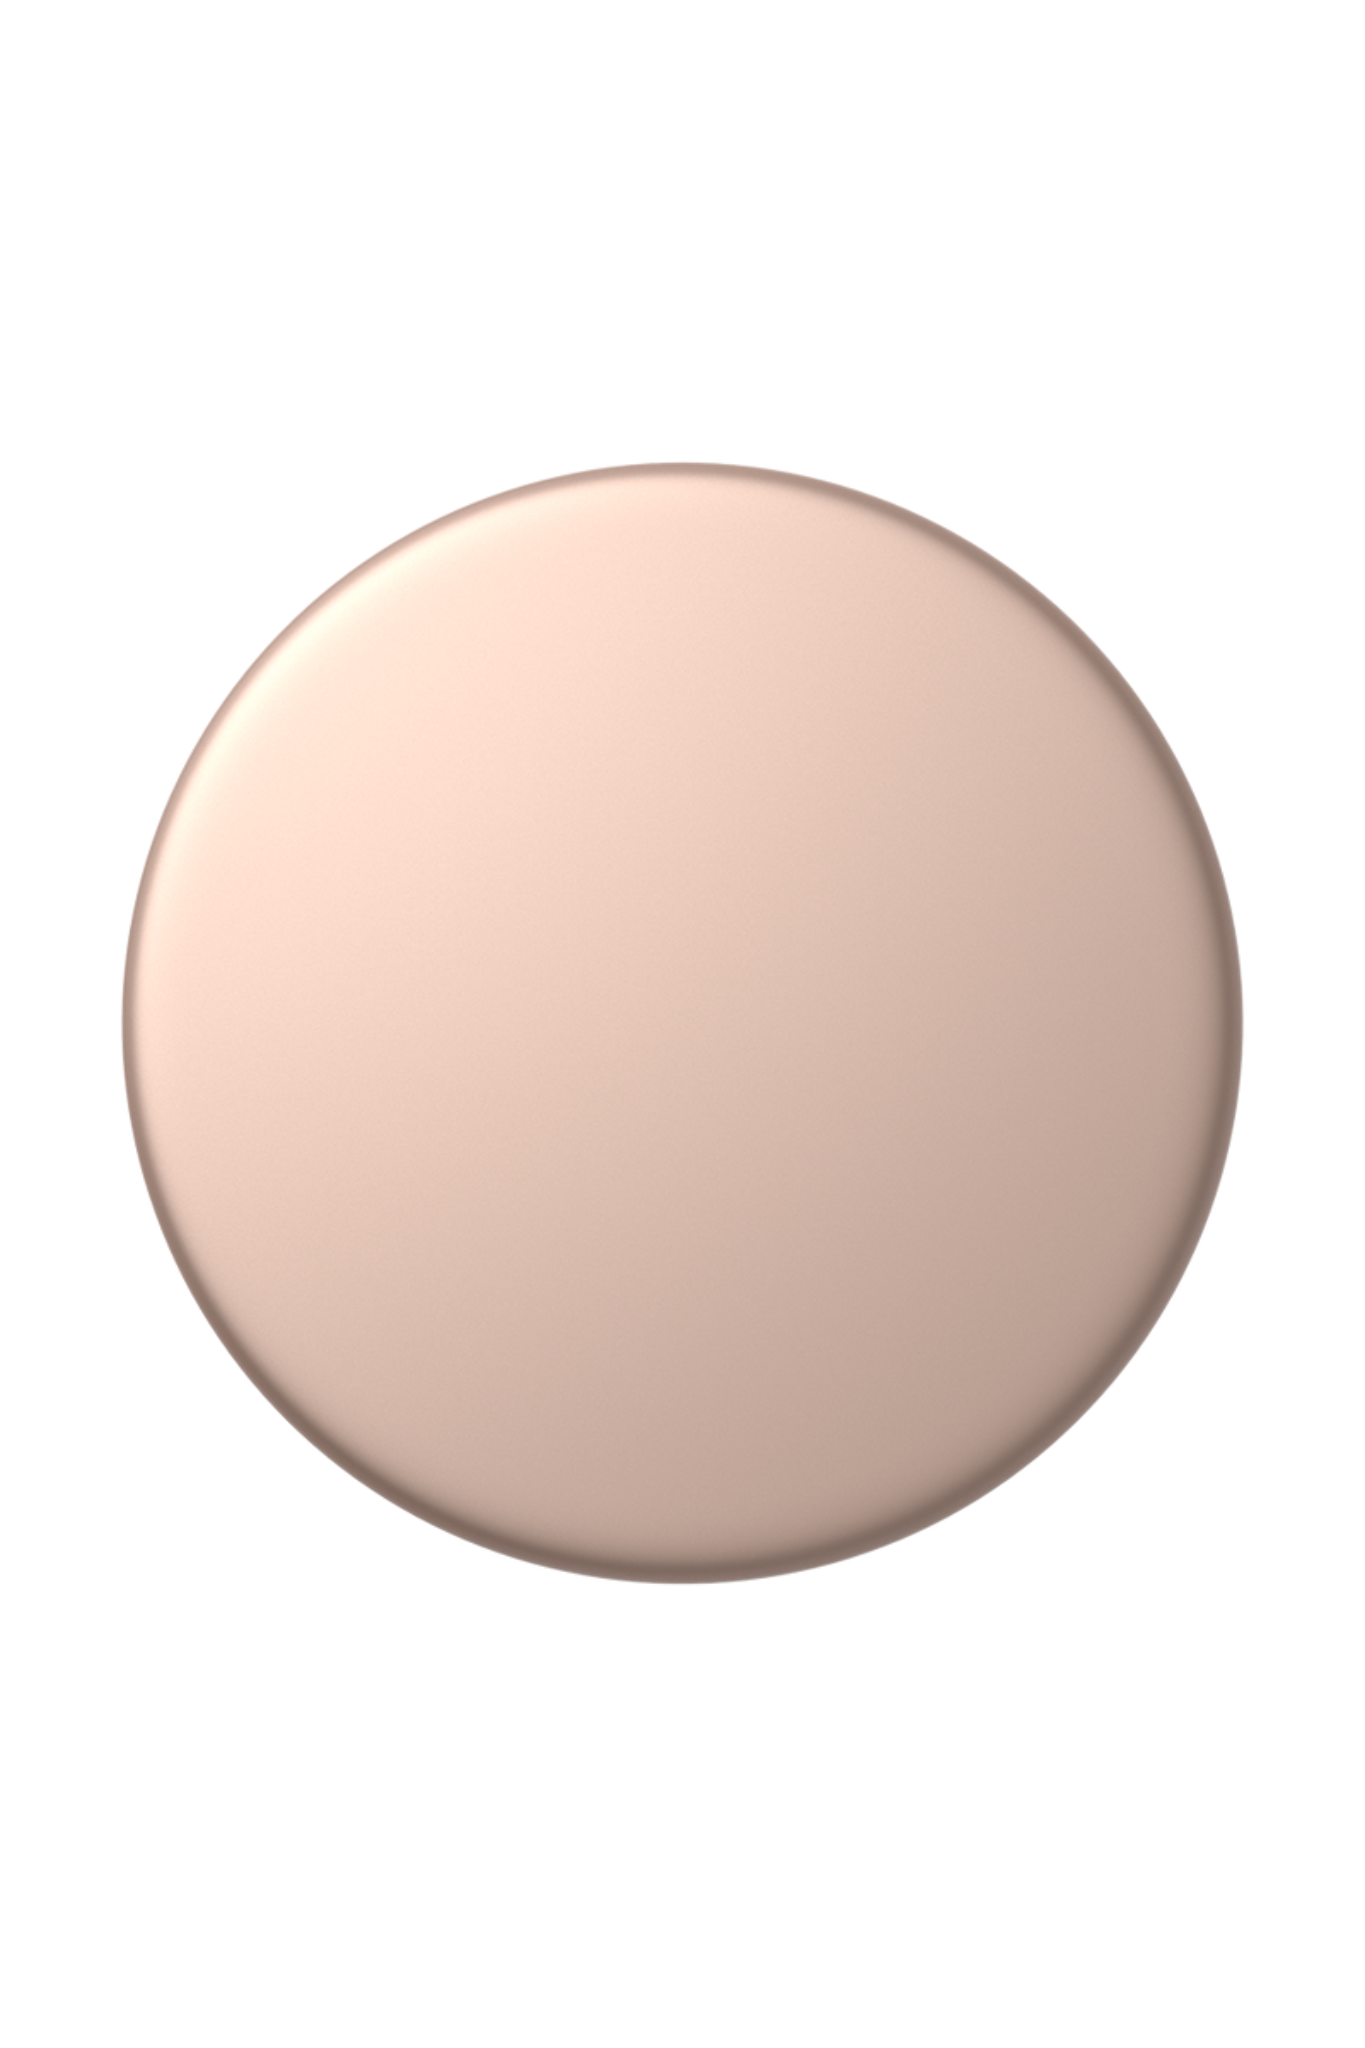 View 2 of PopSockets Rose Gold Aluminum, a Gifts from Larrea Cove. Detail: .